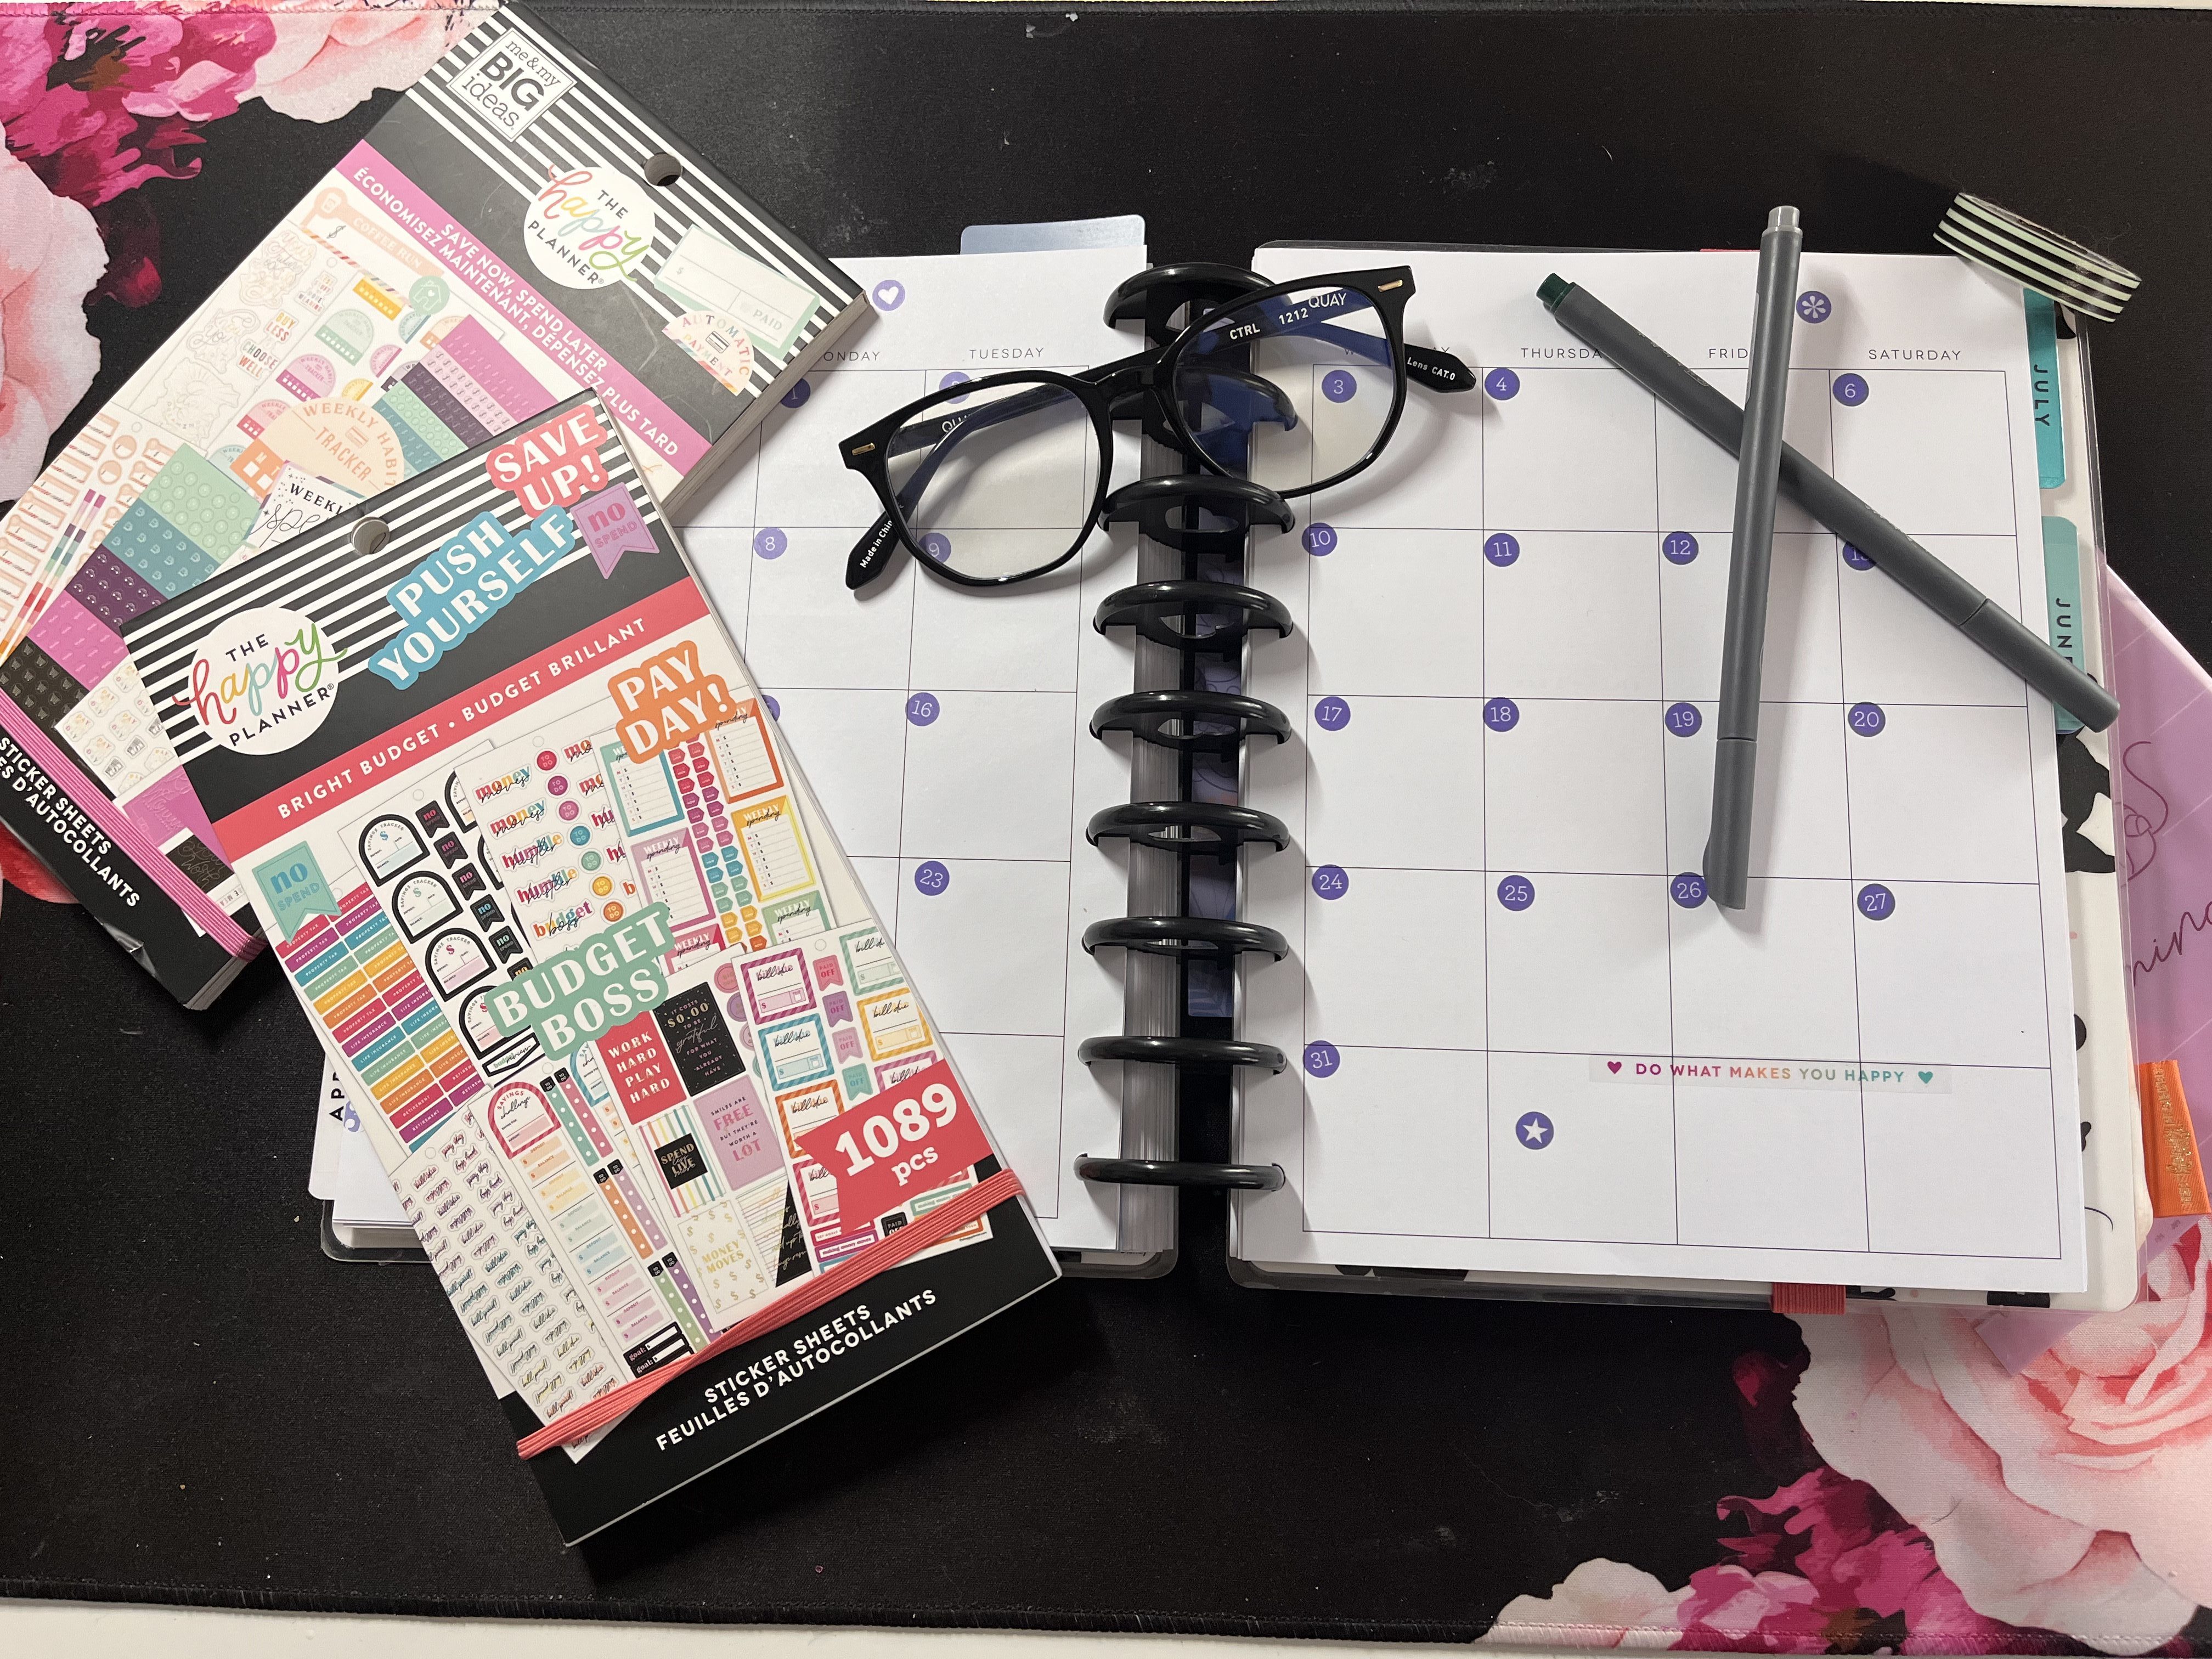 My Top 5 Tips For Making The Most Of Your Happy Planner